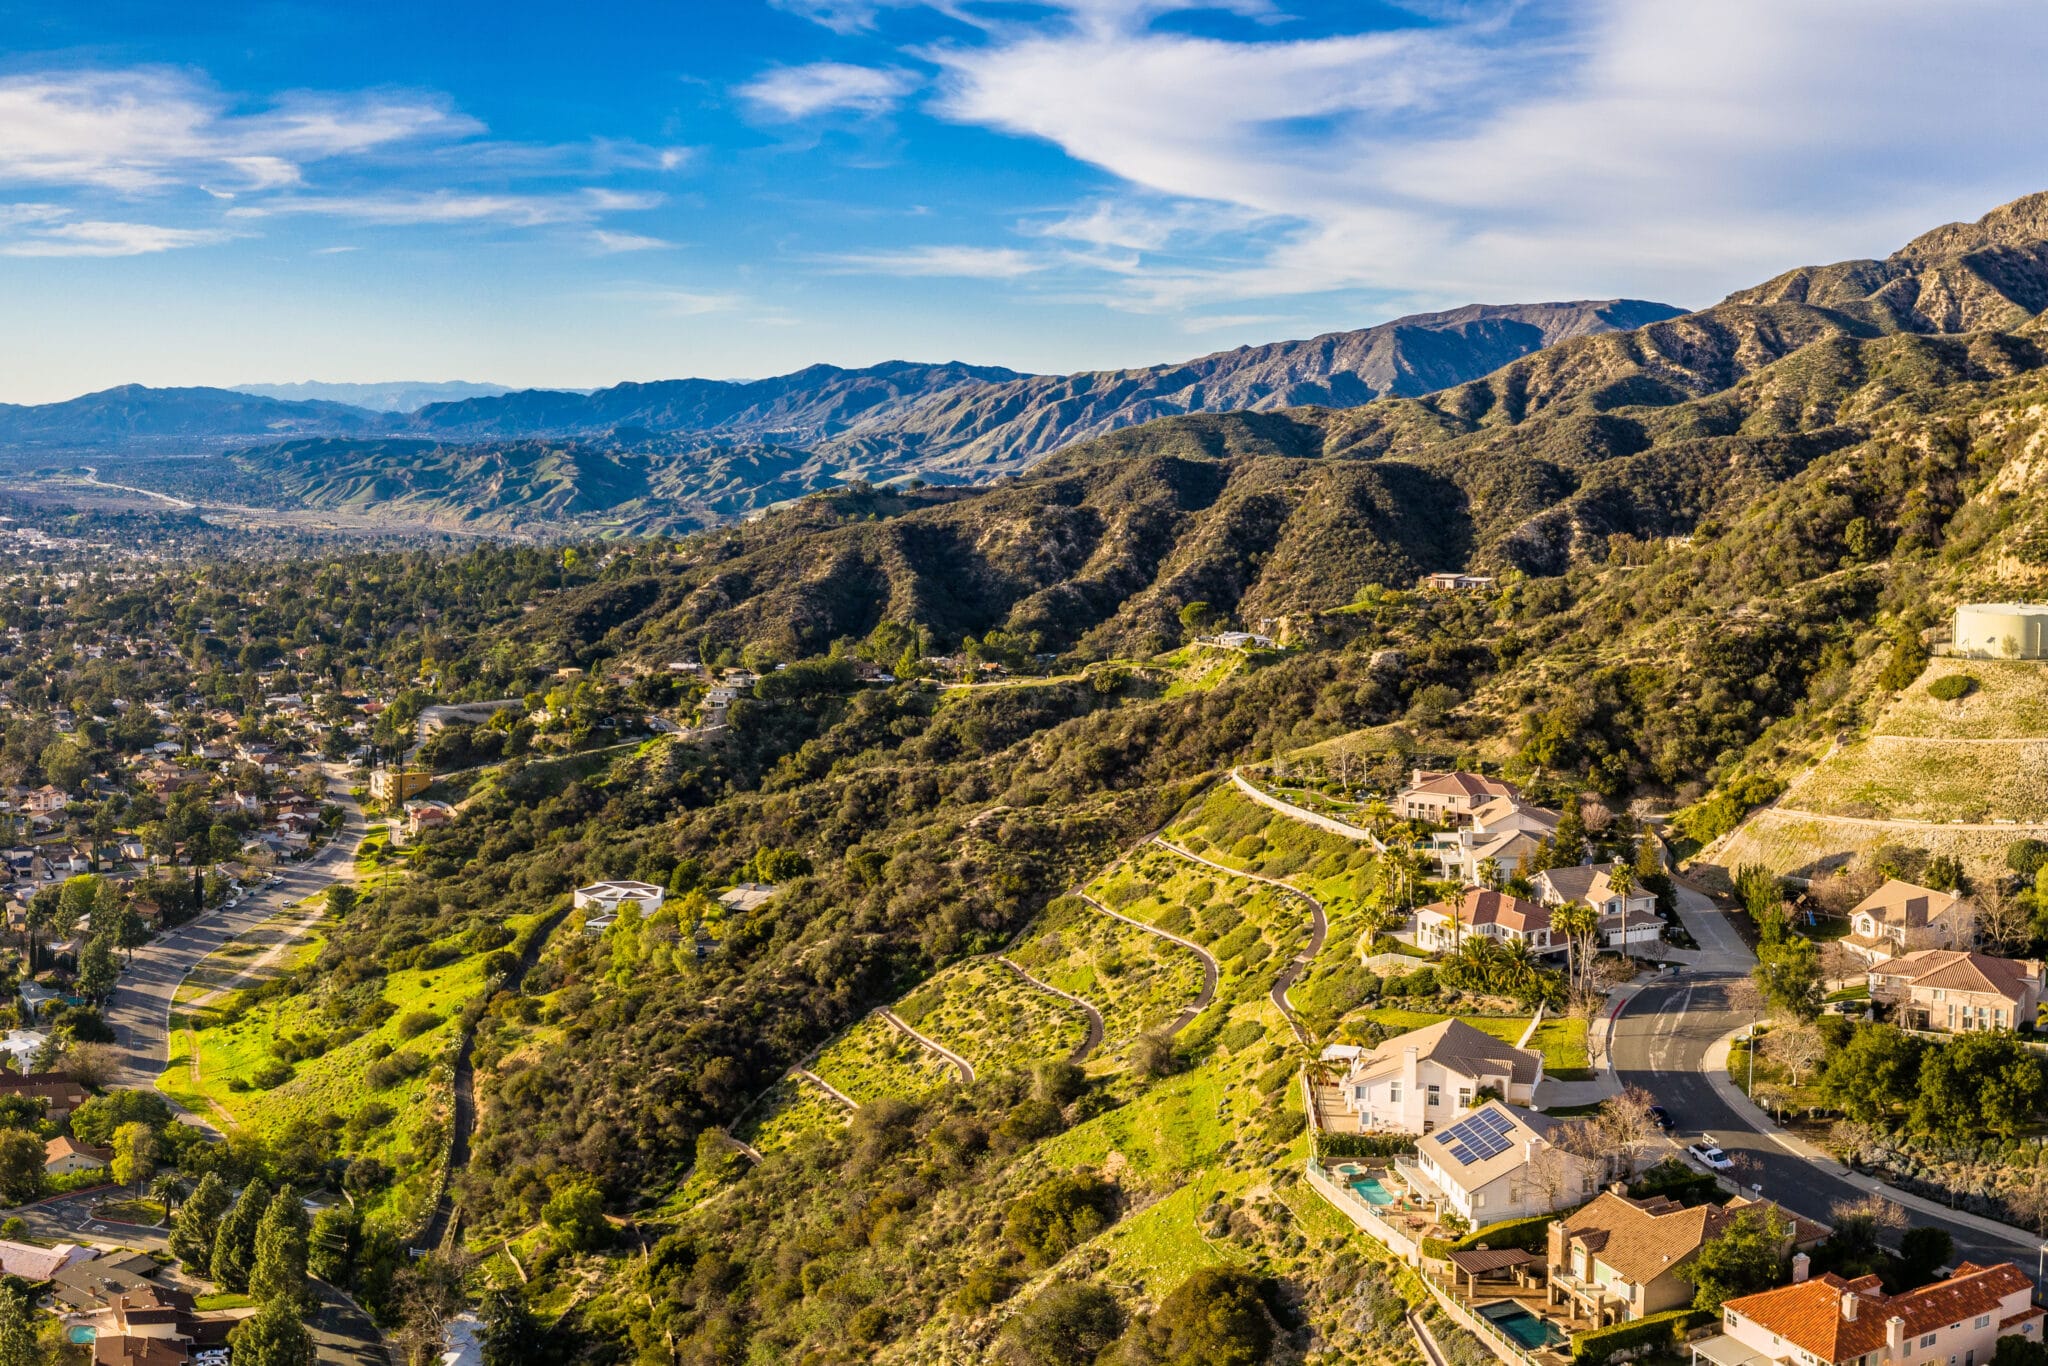 Should You Buy An Investment Property in Monrovia, CA?